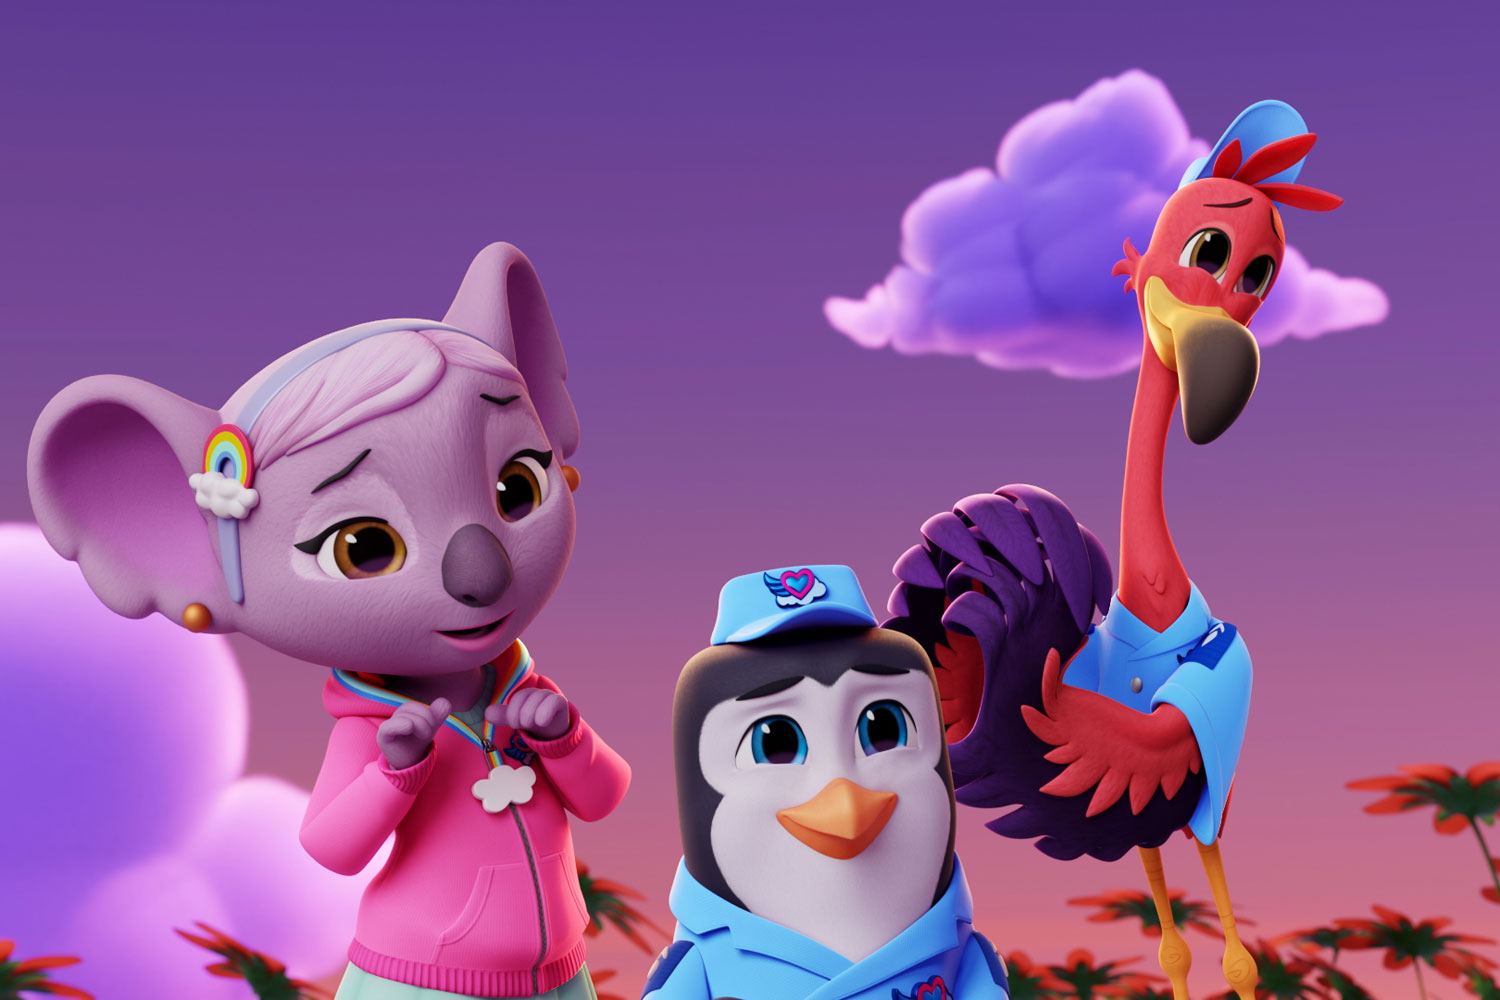 A brand new animated Disney show is coming to OSN | Kids | Time Out Dubai